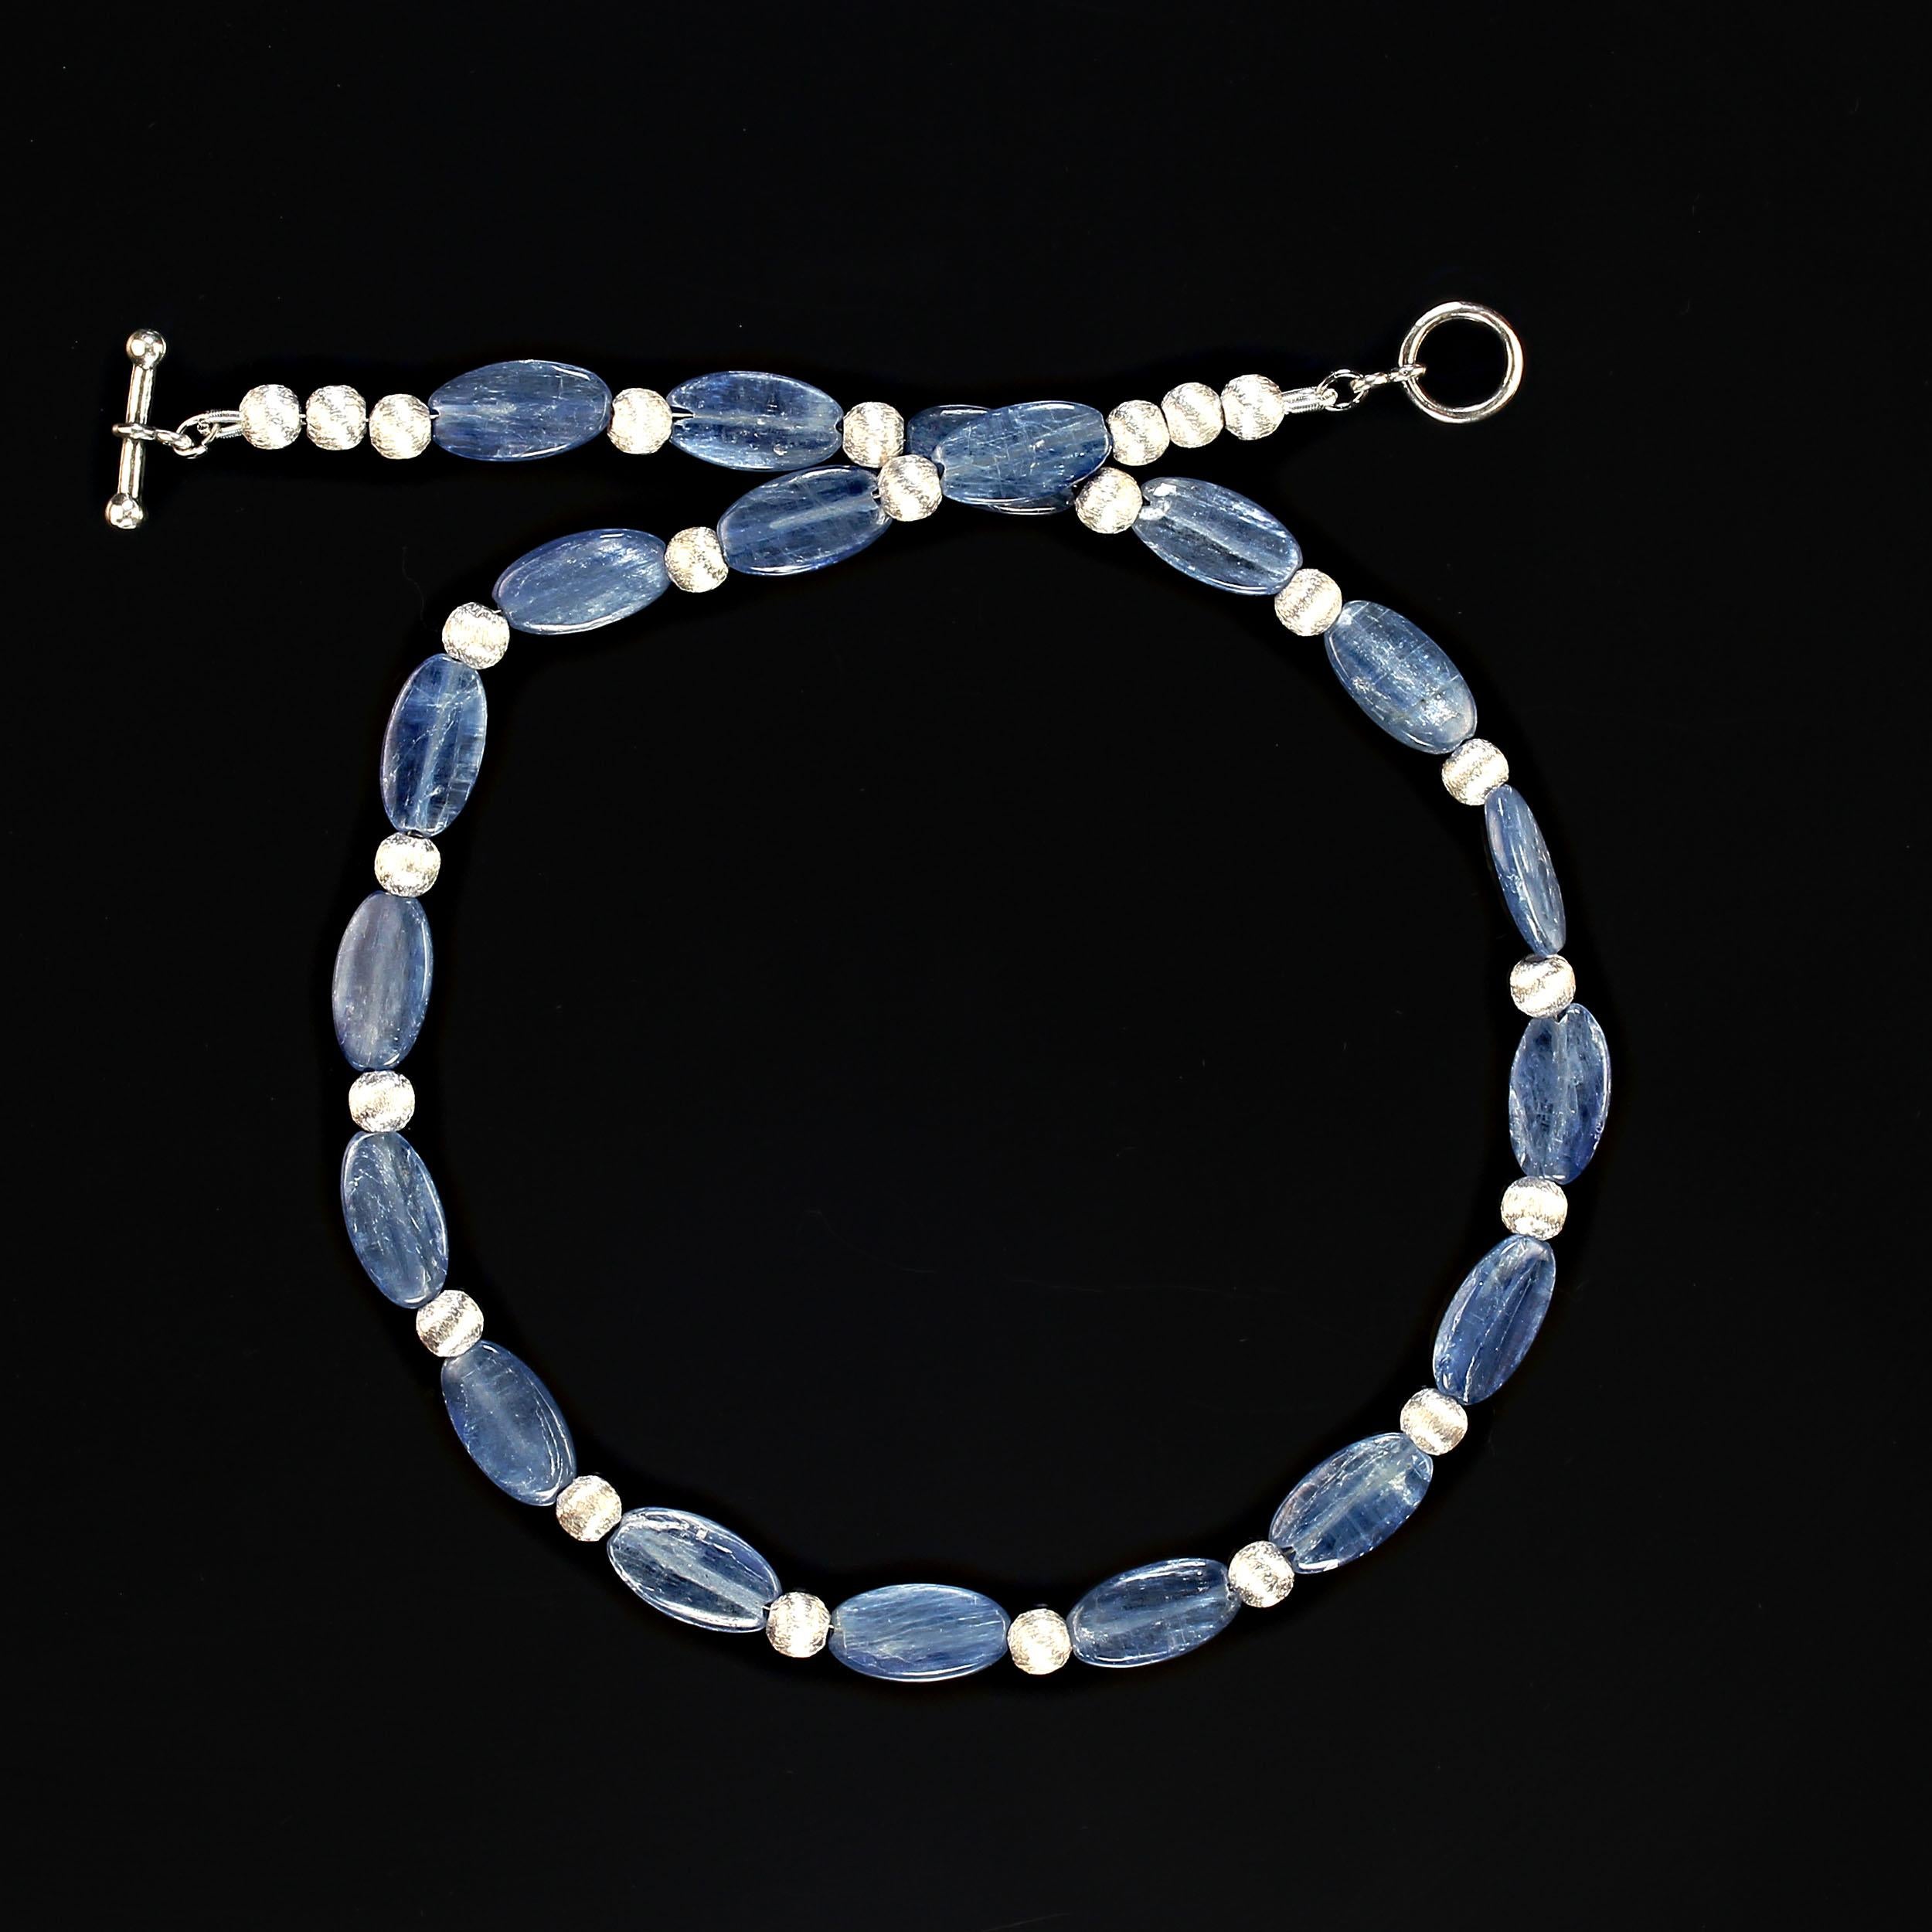 15 Inch blue kyanite and silver tone beads choker necklace. The kyanite, 14x5mm, and silver tone beads, 5mm, have parallel striations. This delightful necklace is secured with a silver toggle clasp.  MN2390